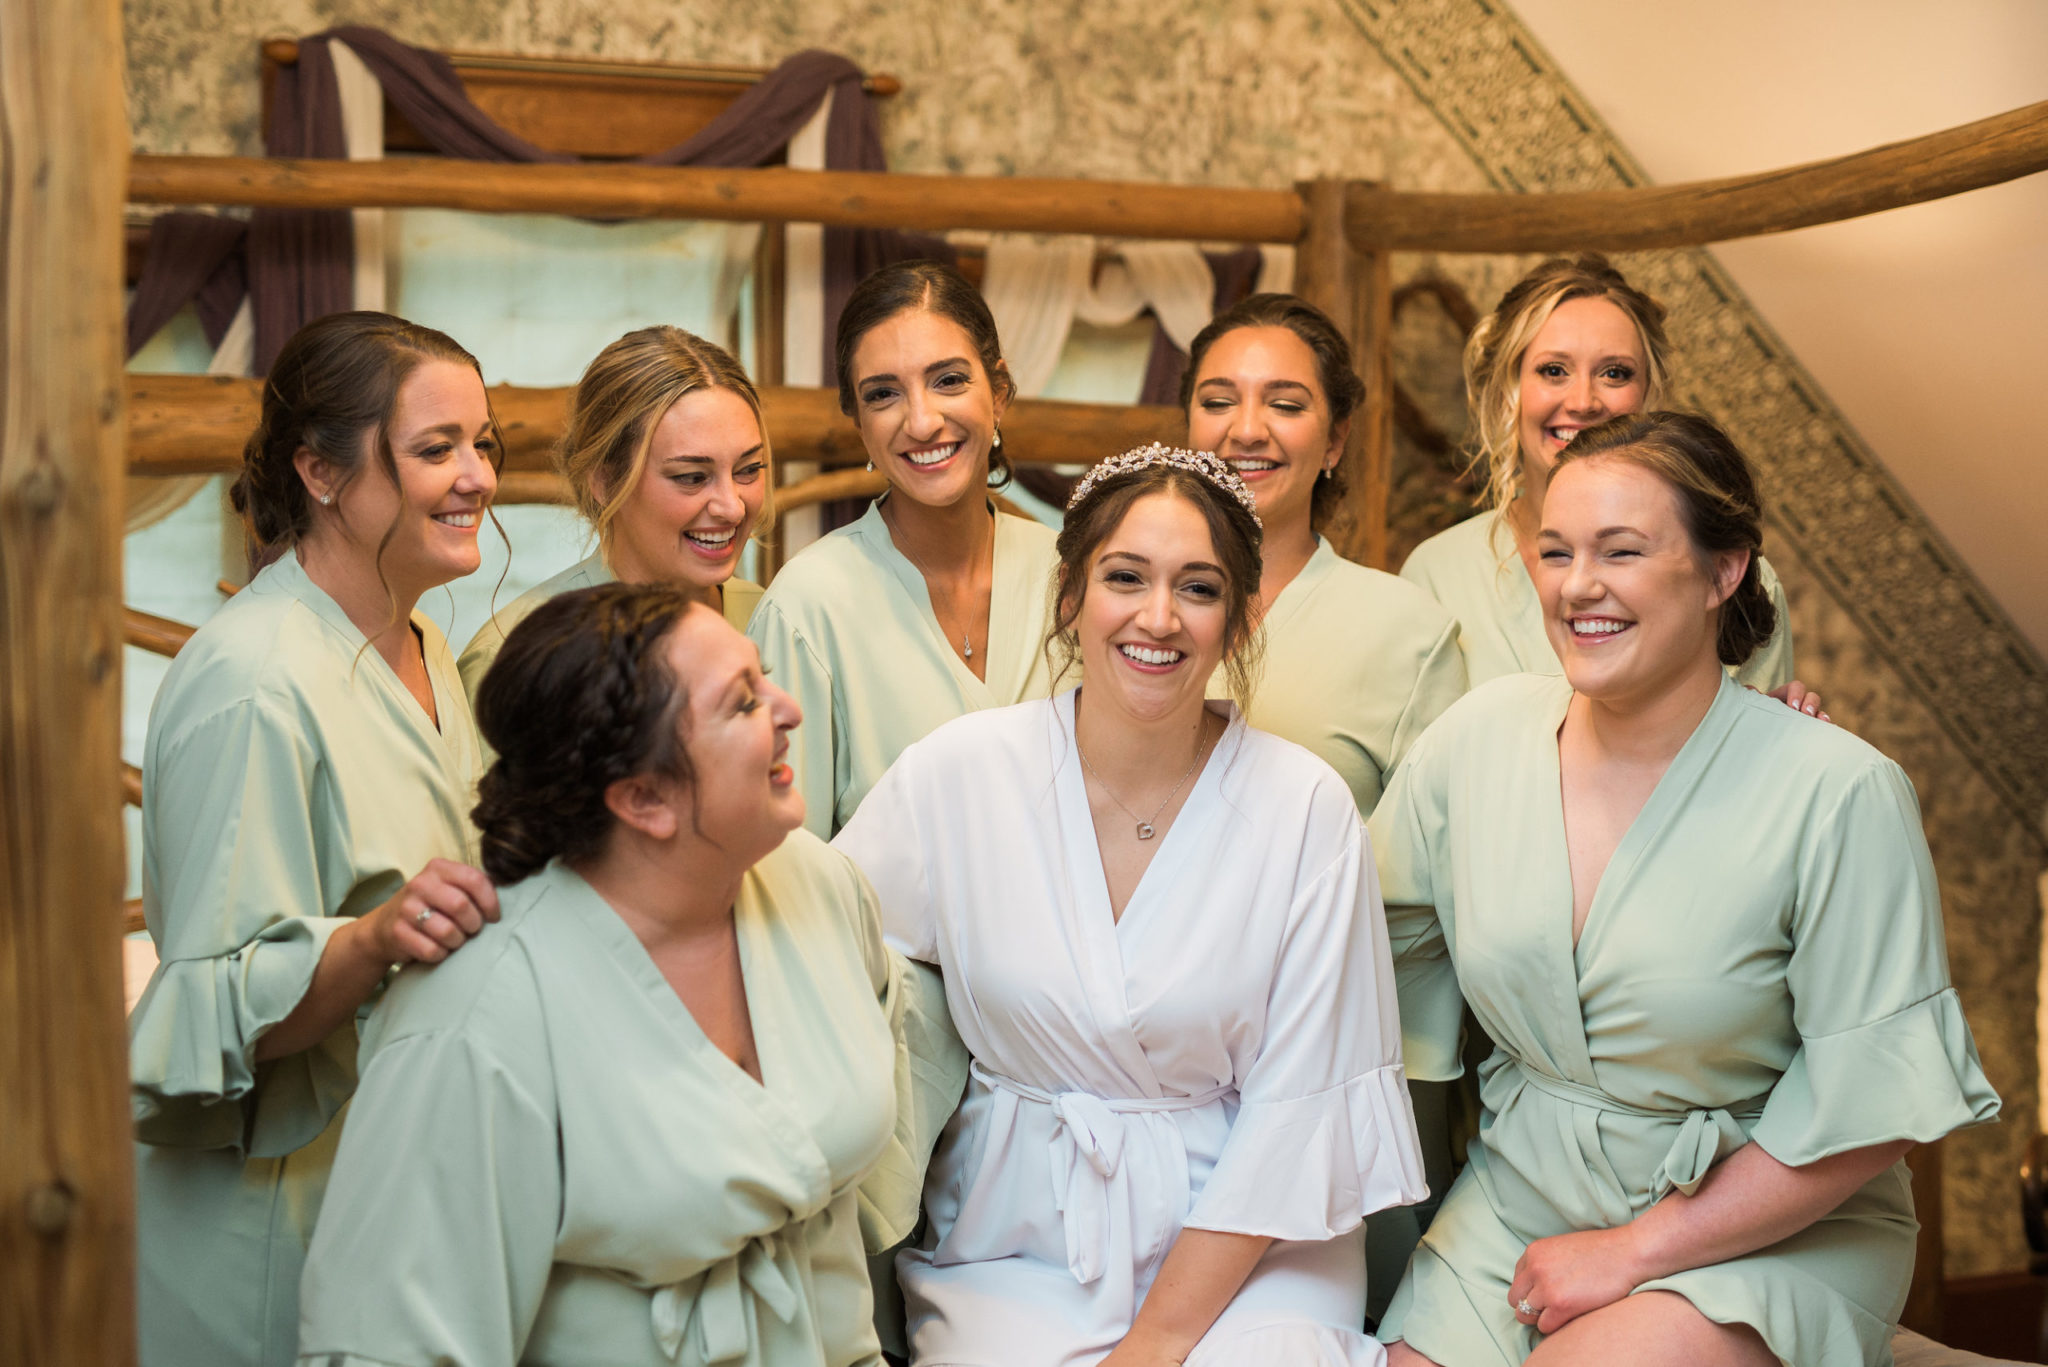 a bride smiling with her bridesmaids during getting ready photos